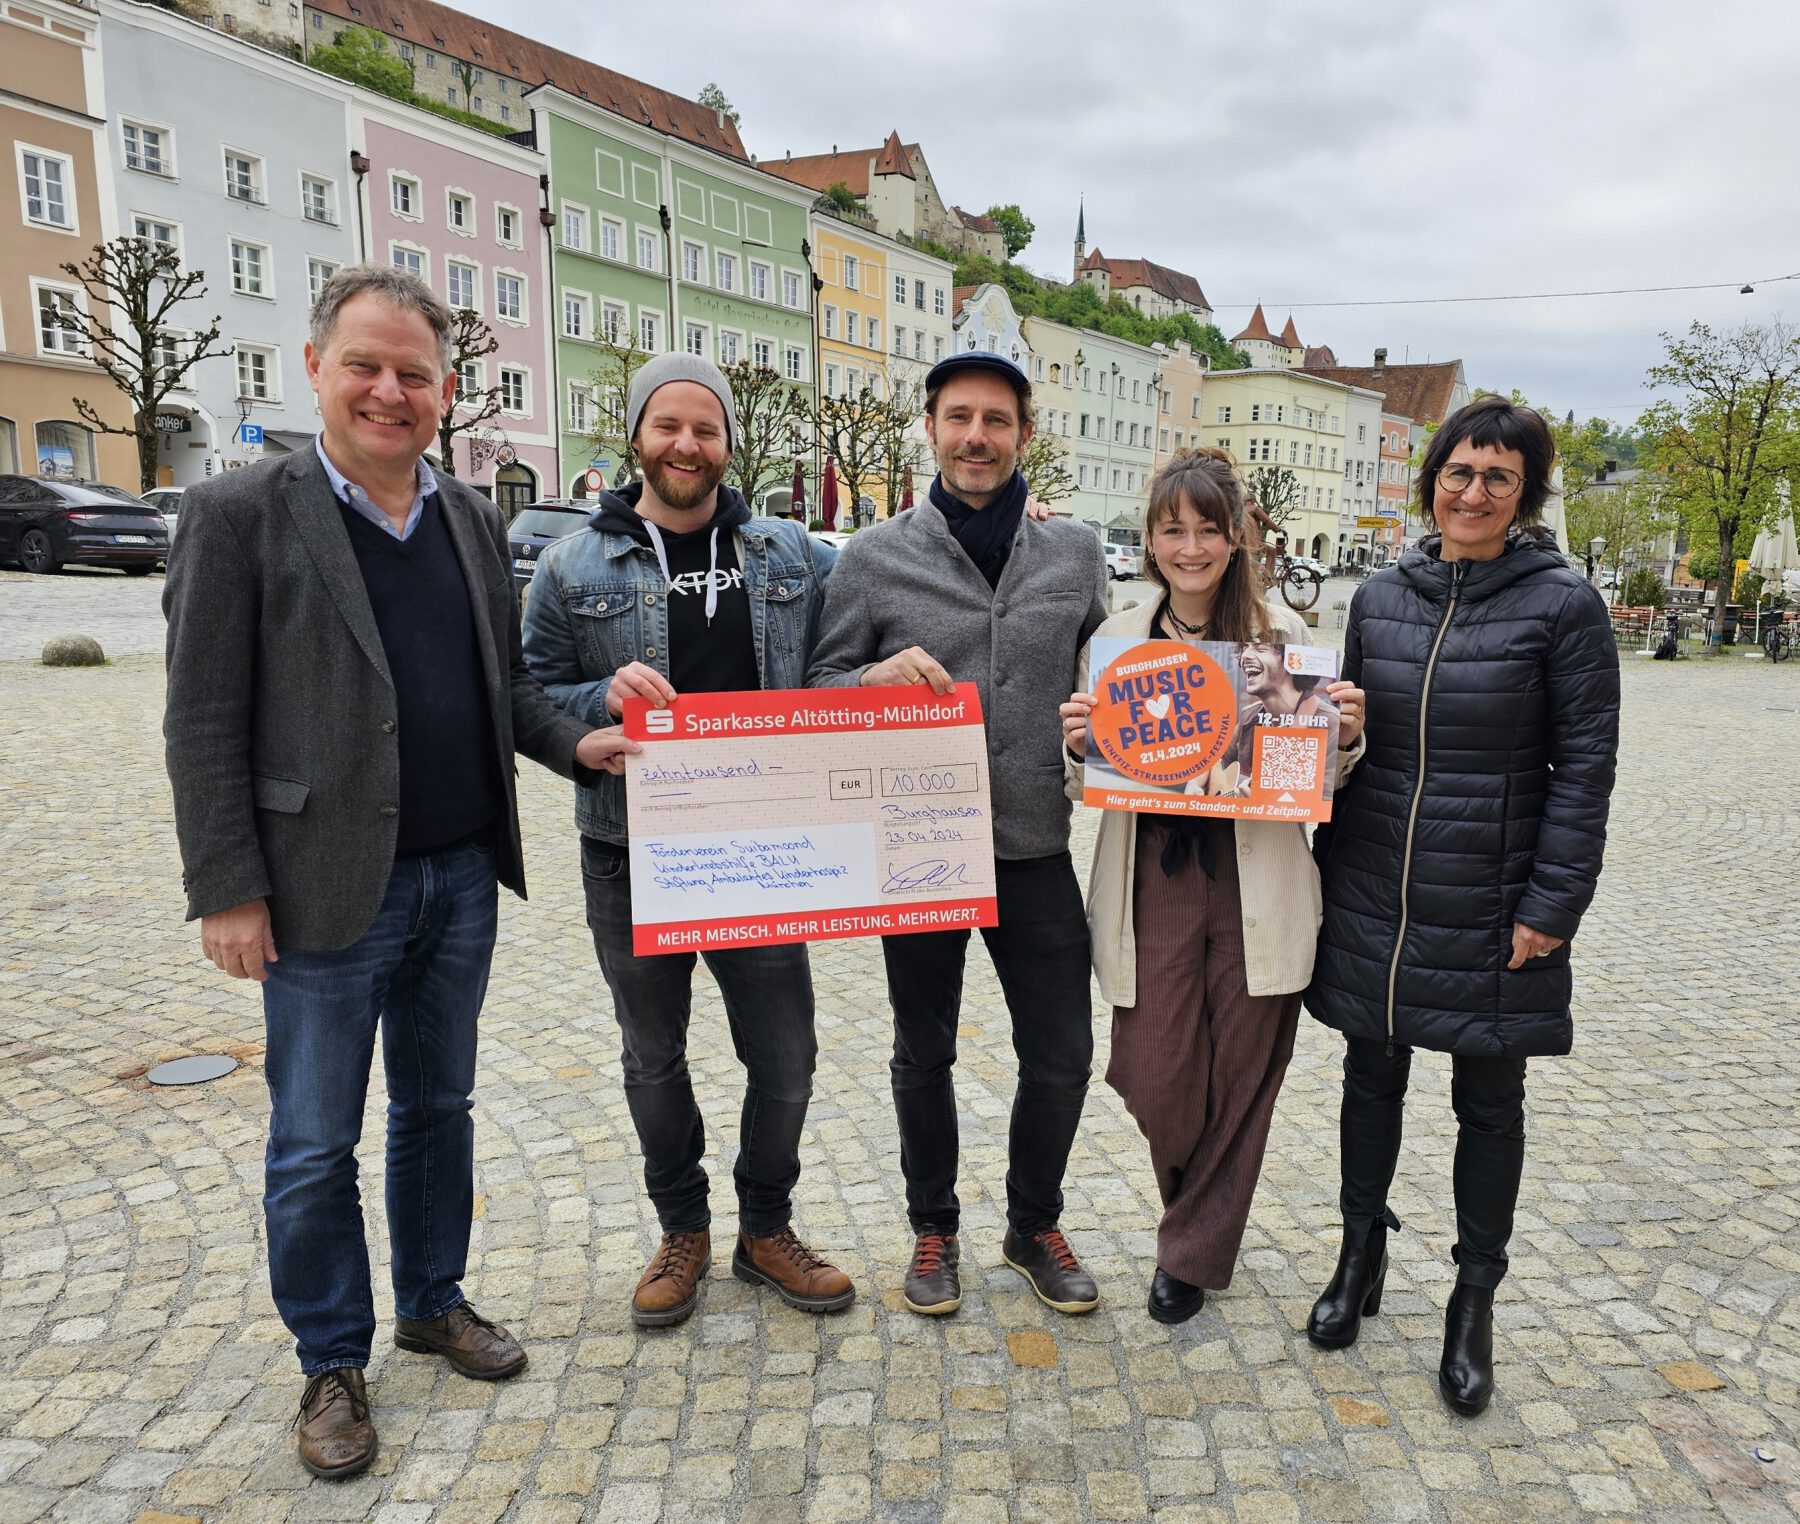 The organizers of the charity street music festival happily accepted the donation amount, which had been increased to €10.000 by the city. From left: First Mayor Florian Schneider, the organizers Max Roxton, Erik Bönisch, Susanne Kramlinger and Sigrid Resch, managing director of Burghauser Touristik GmbH. Photo credit: City of Burghausen